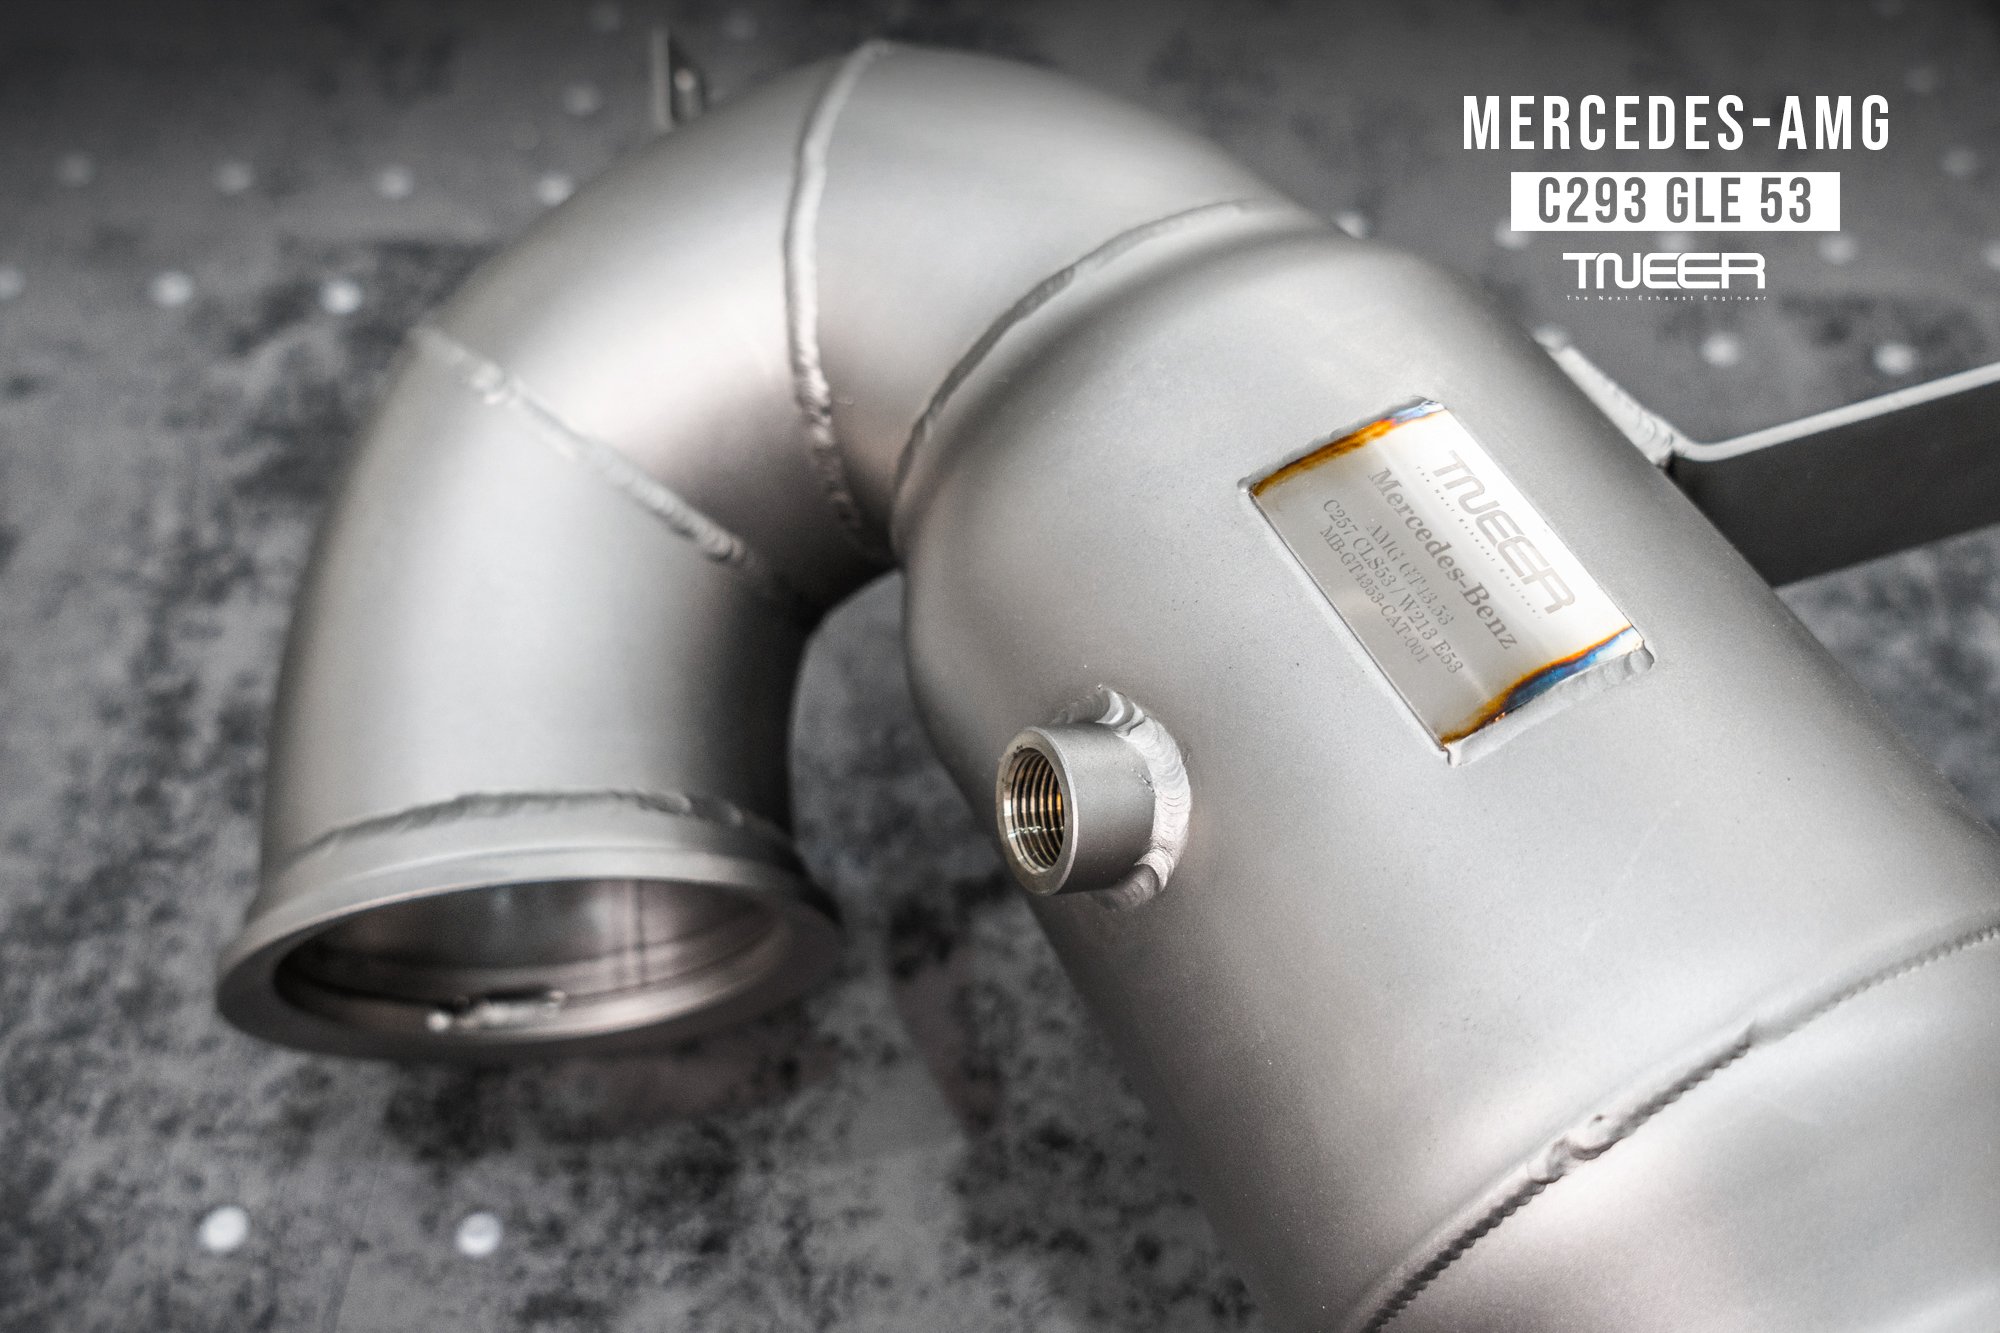 Mercedes-AMG C293 GLE53 TNEER Performance Exhaust System